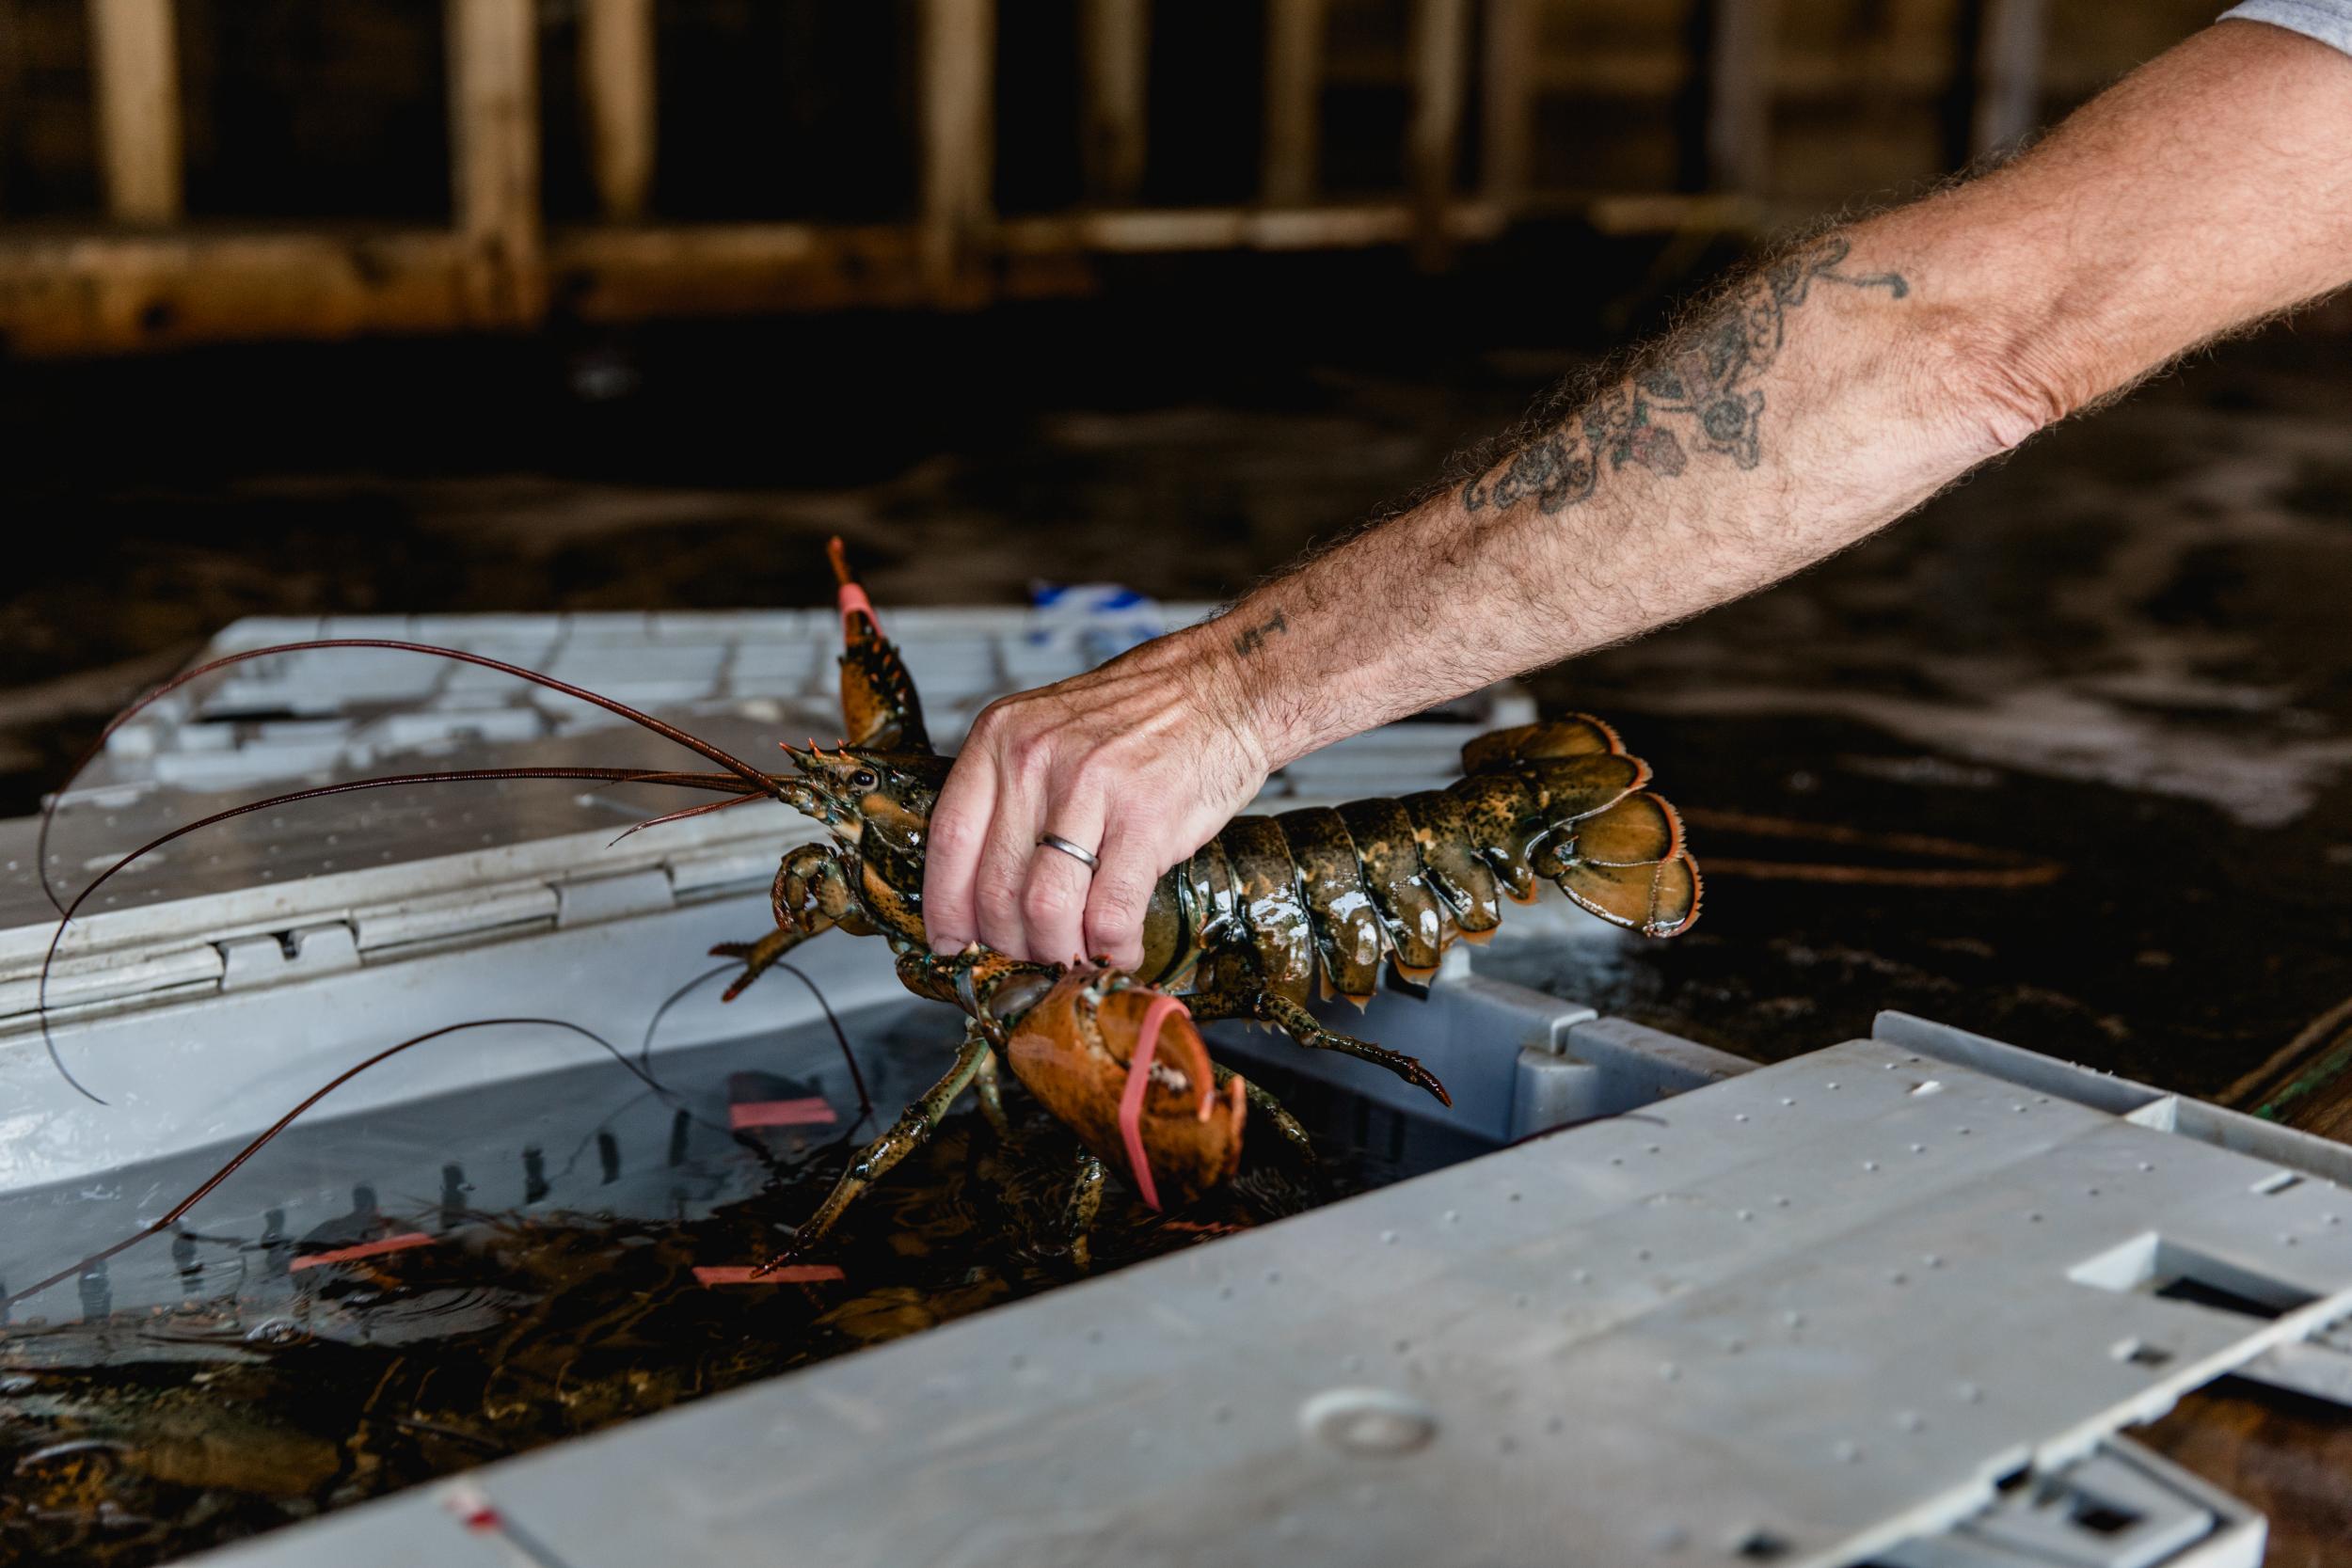 Lobster is so popular it even has its own festival